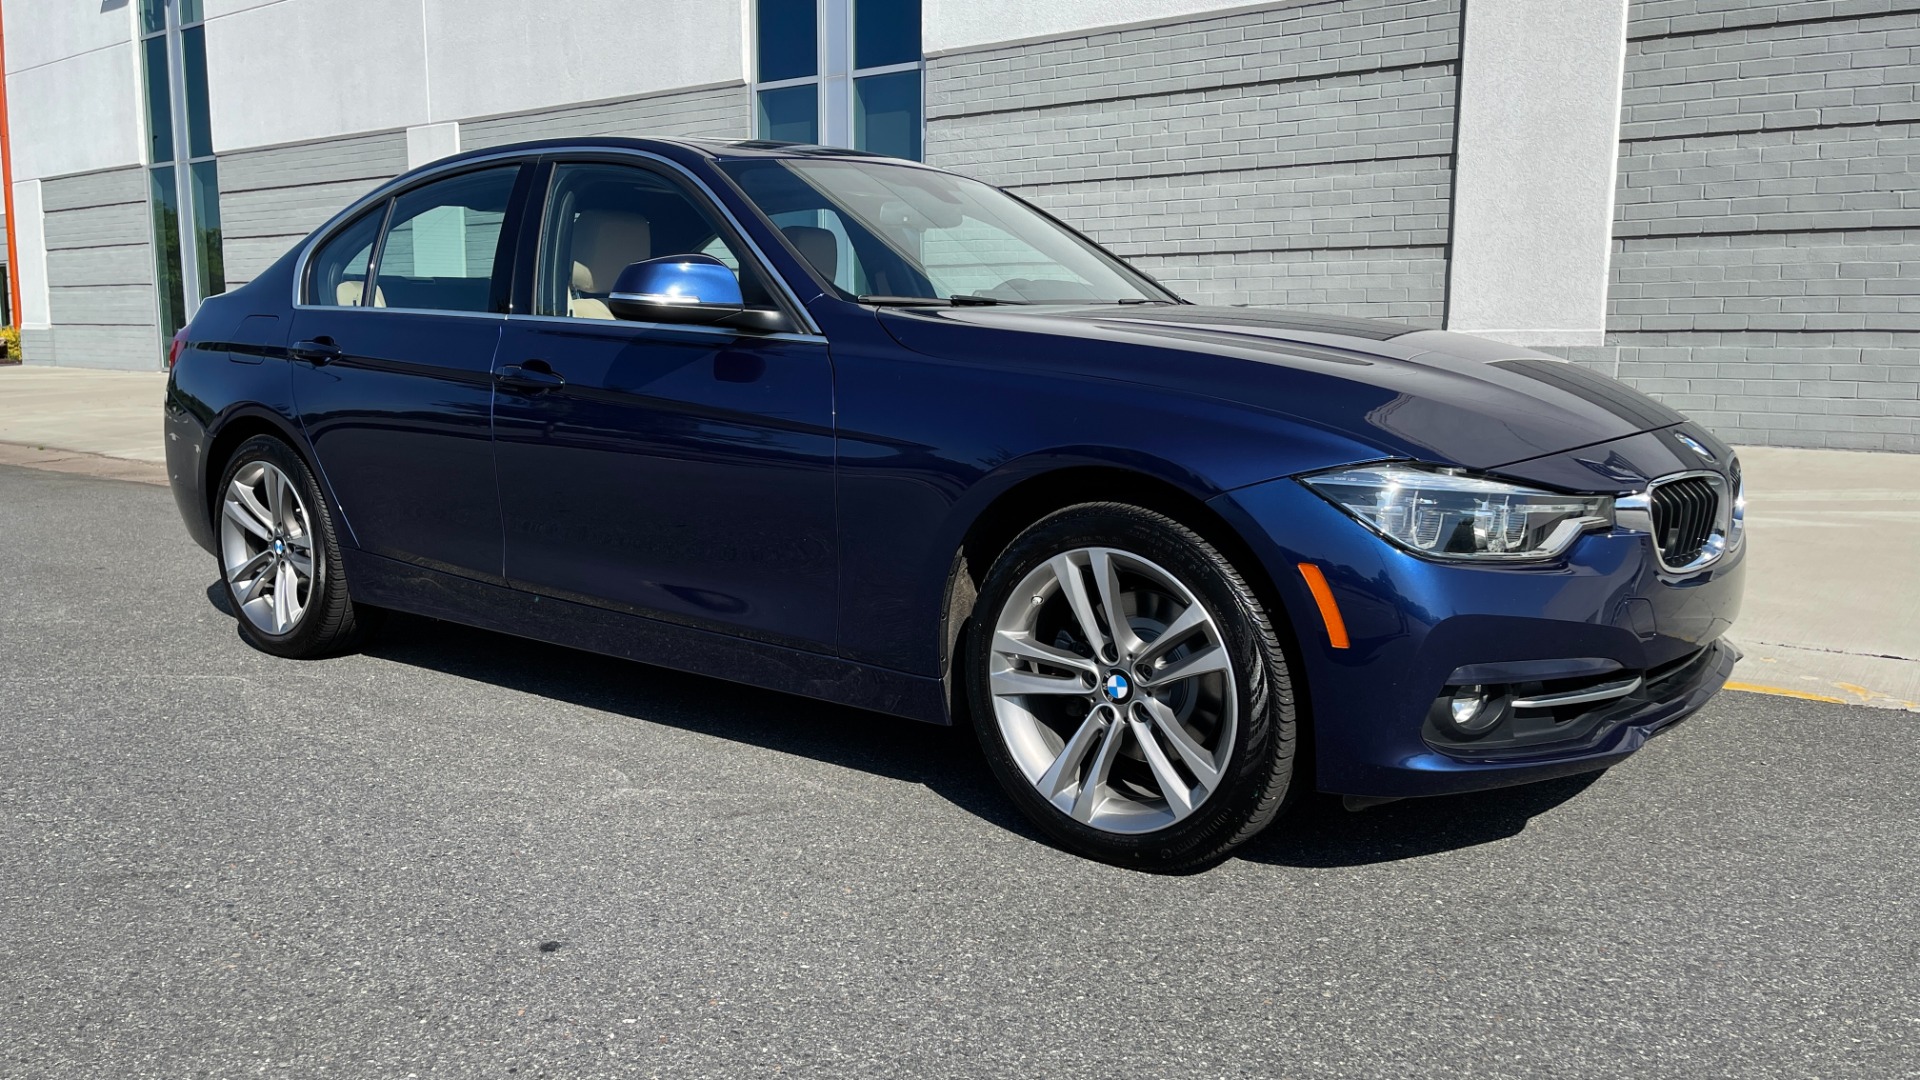 Used 2018 BMW 3 SERIES 330I XDRIVE / CONV PKG / SUNROOF / HTD STS / BLIND SPOT for sale Sold at Formula Imports in Charlotte NC 28227 7